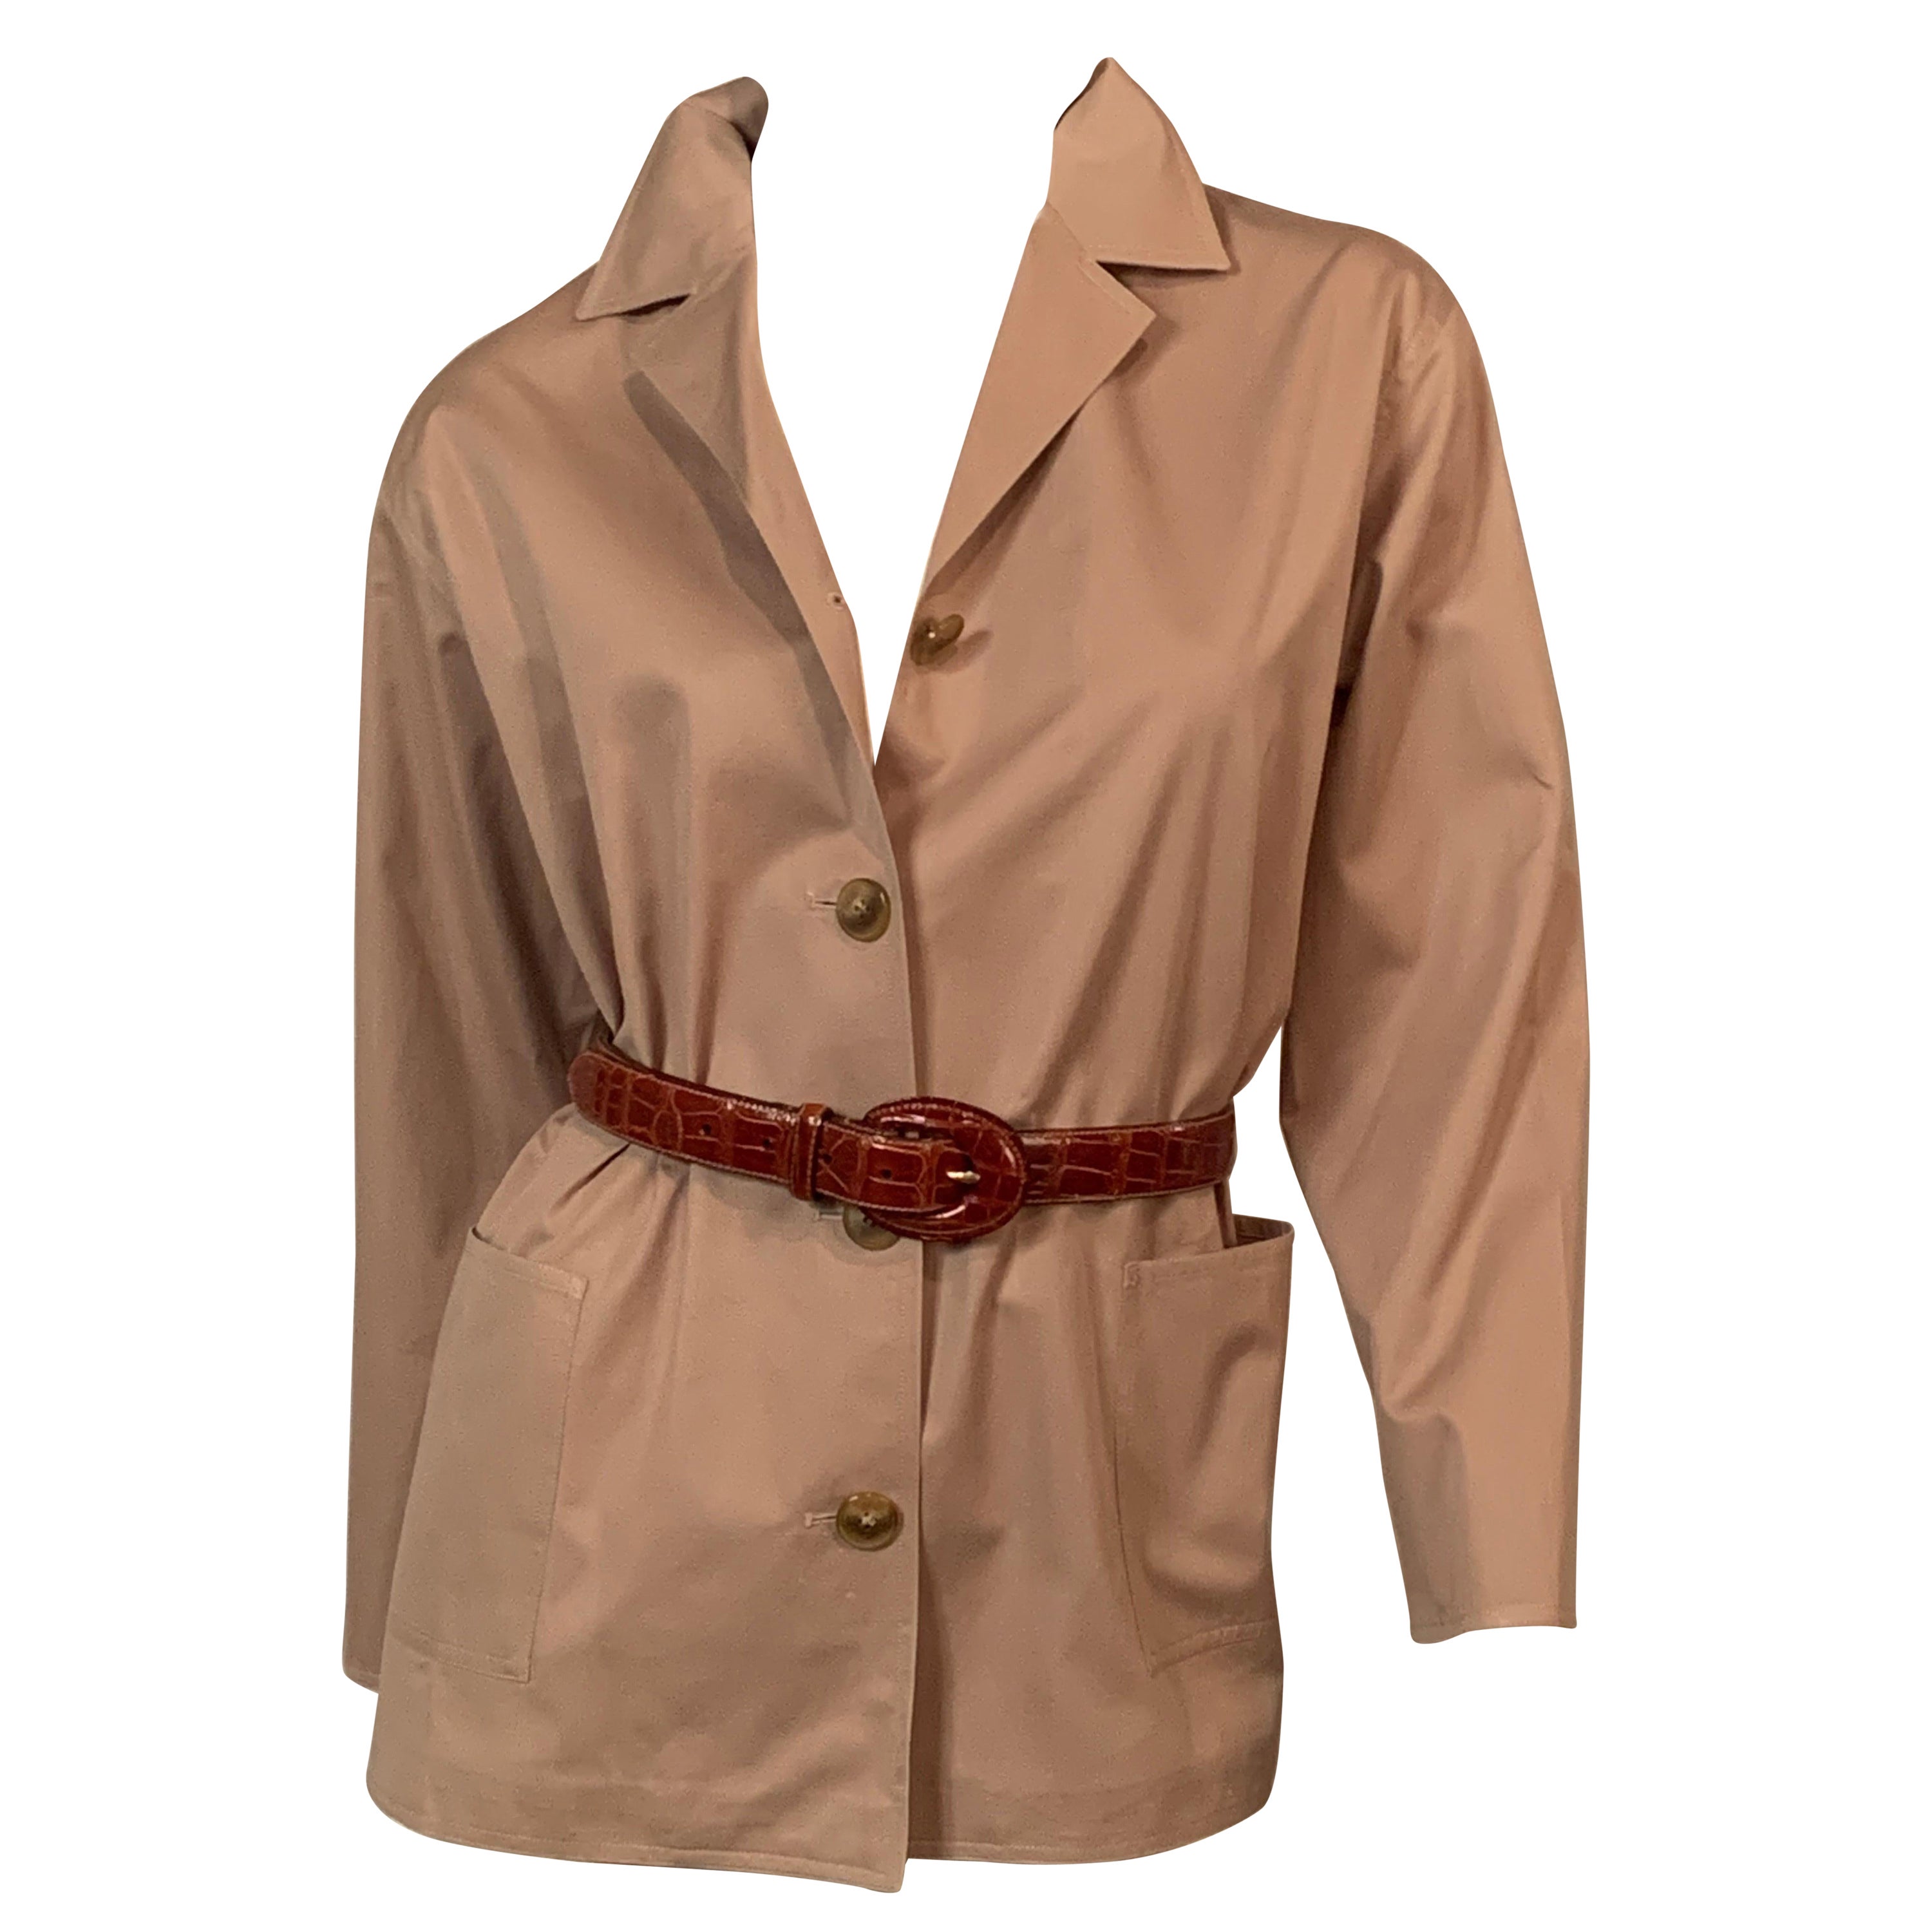 Shamask Safari Style Cotton Jacket with Original Price Tag For Sale